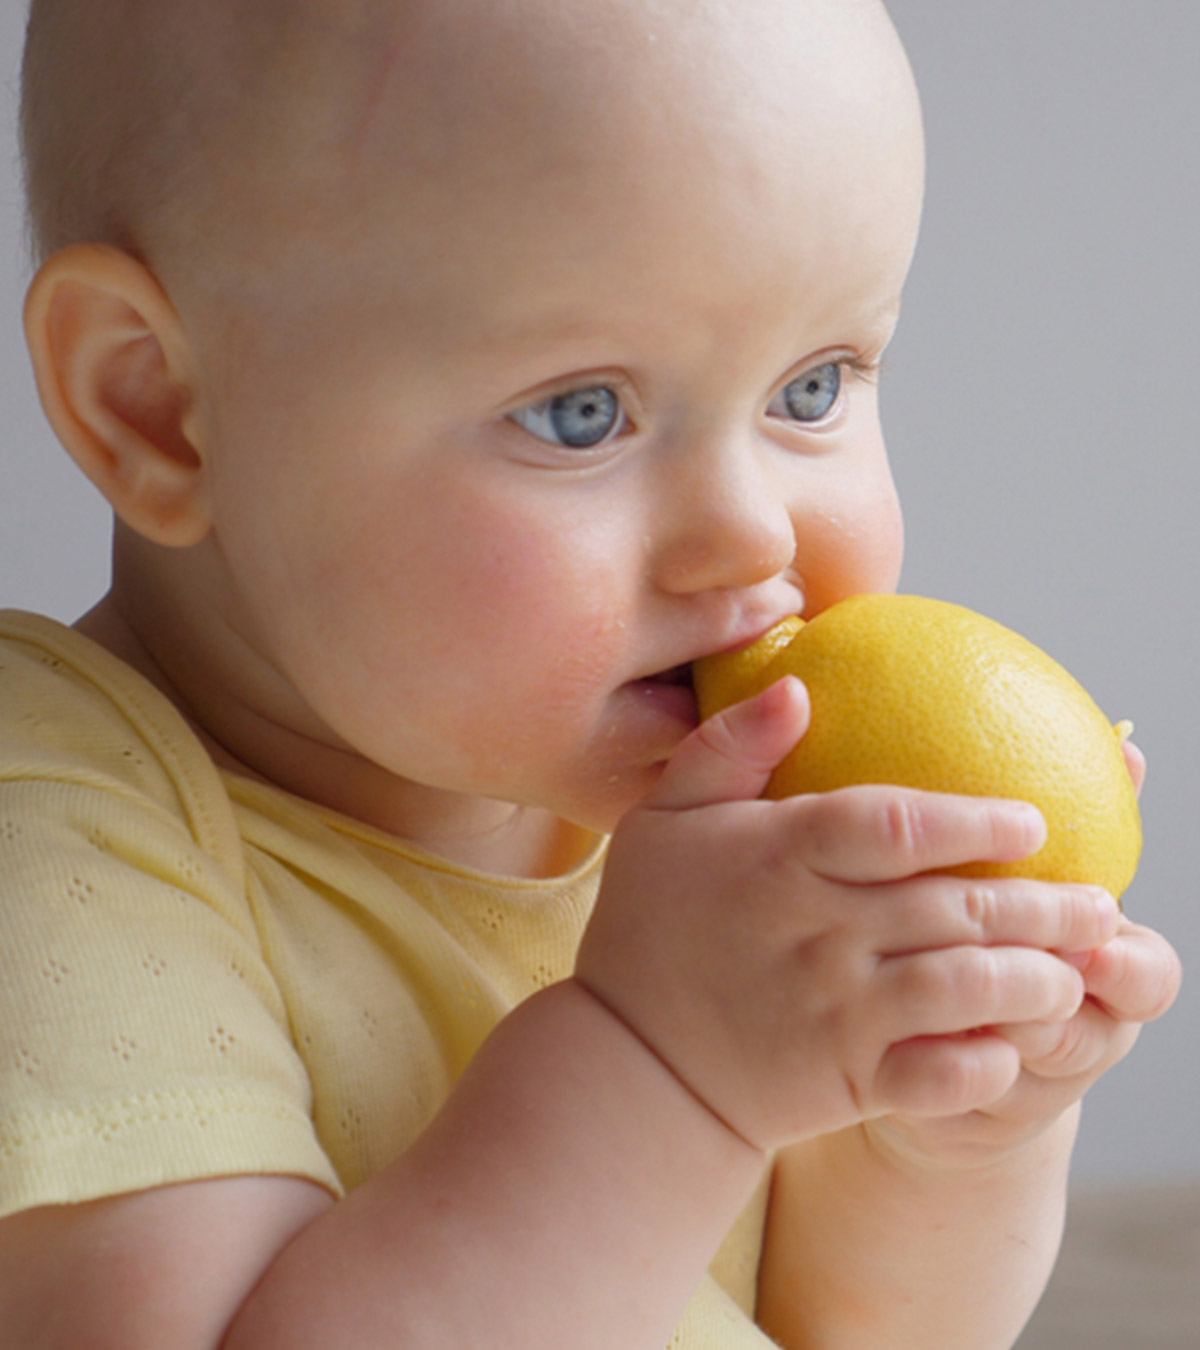 Lemon For Babies: When To Introduce, Benefits And Side Effects